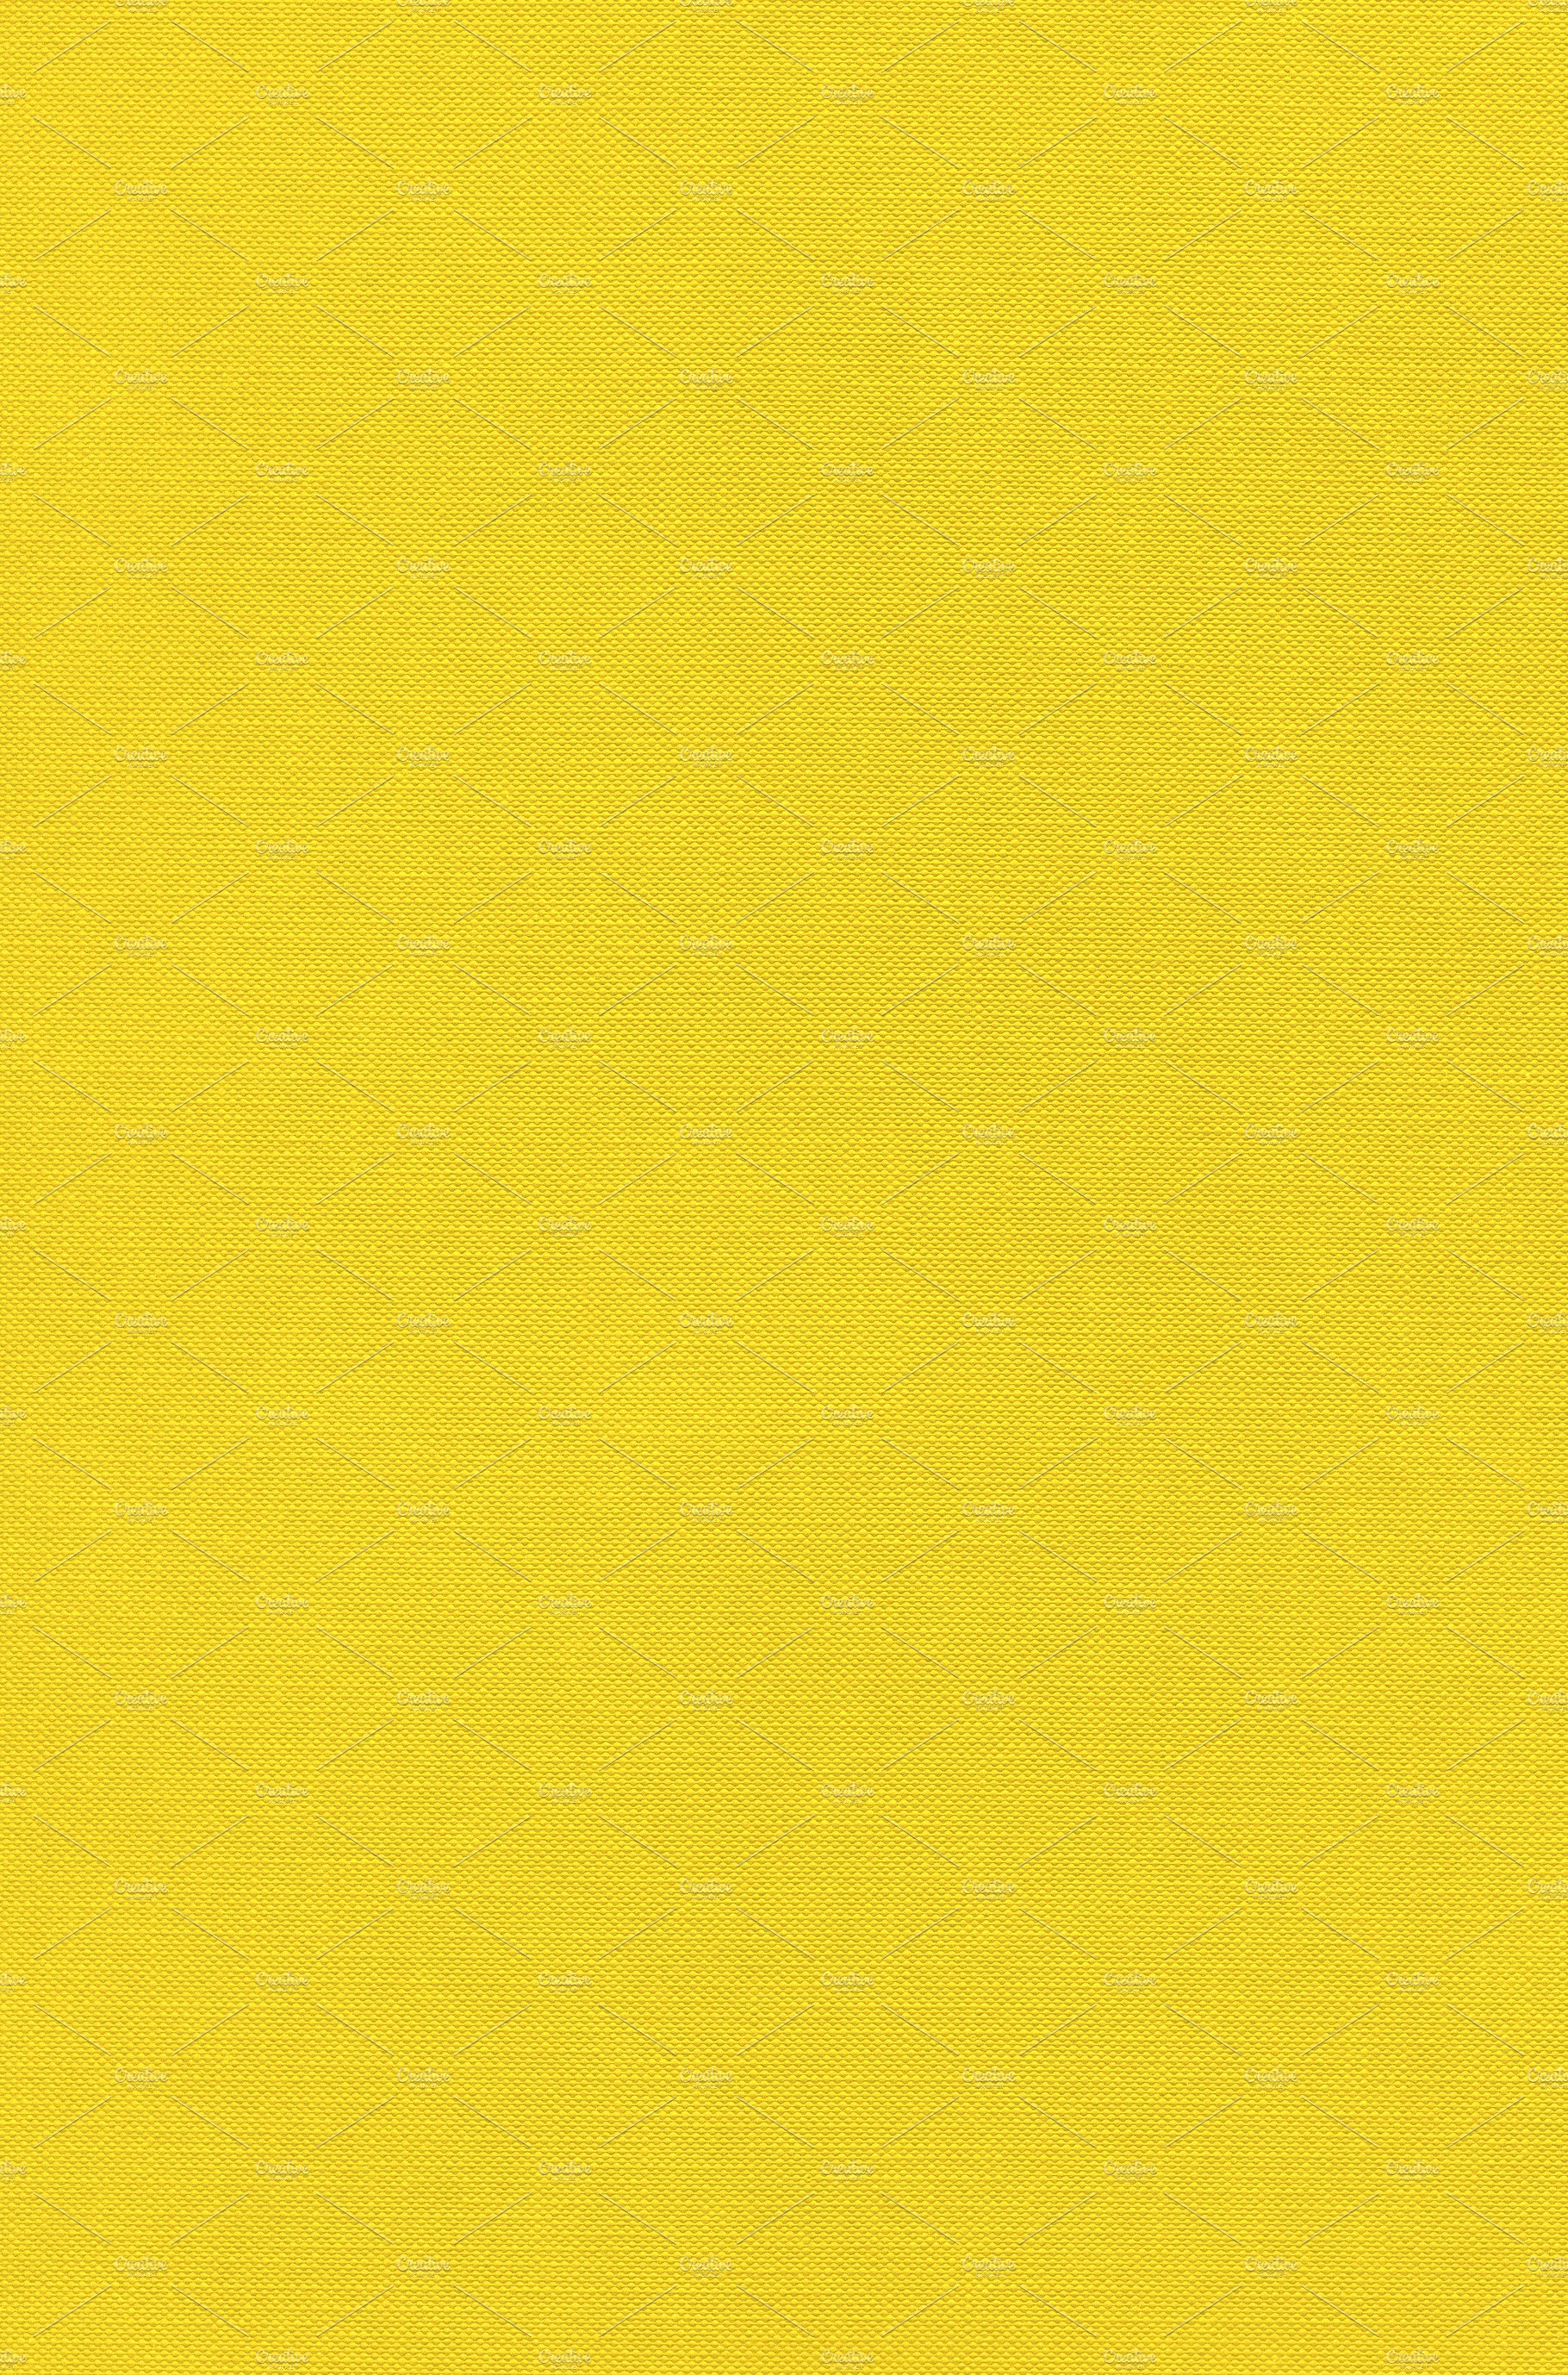 Yellow canvas texture background cover image.